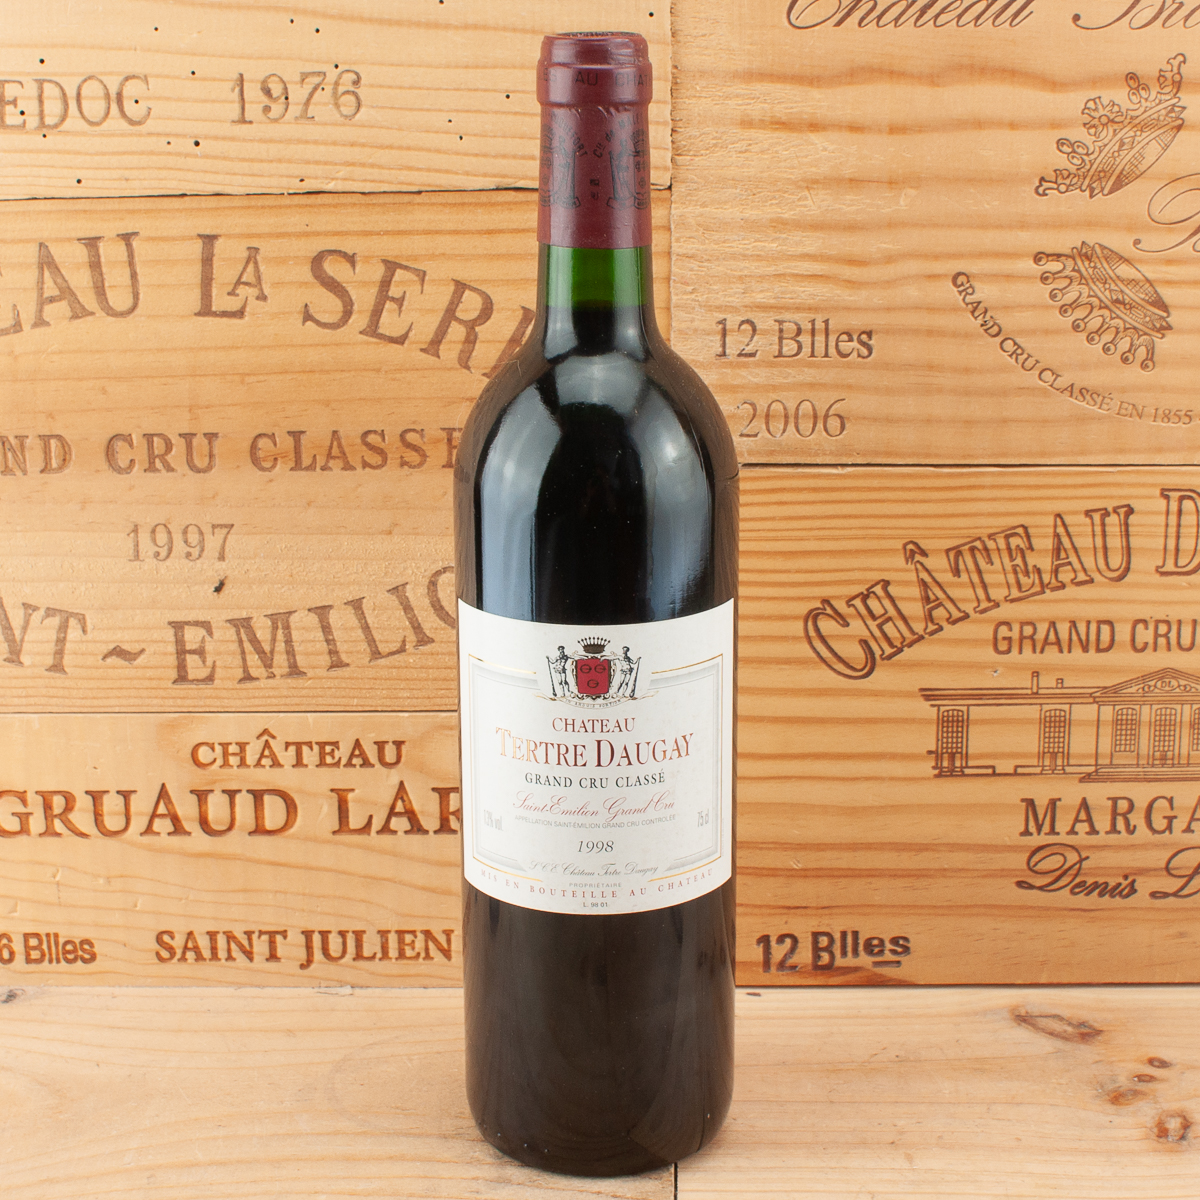 1998 Chateau Tertre Daugay